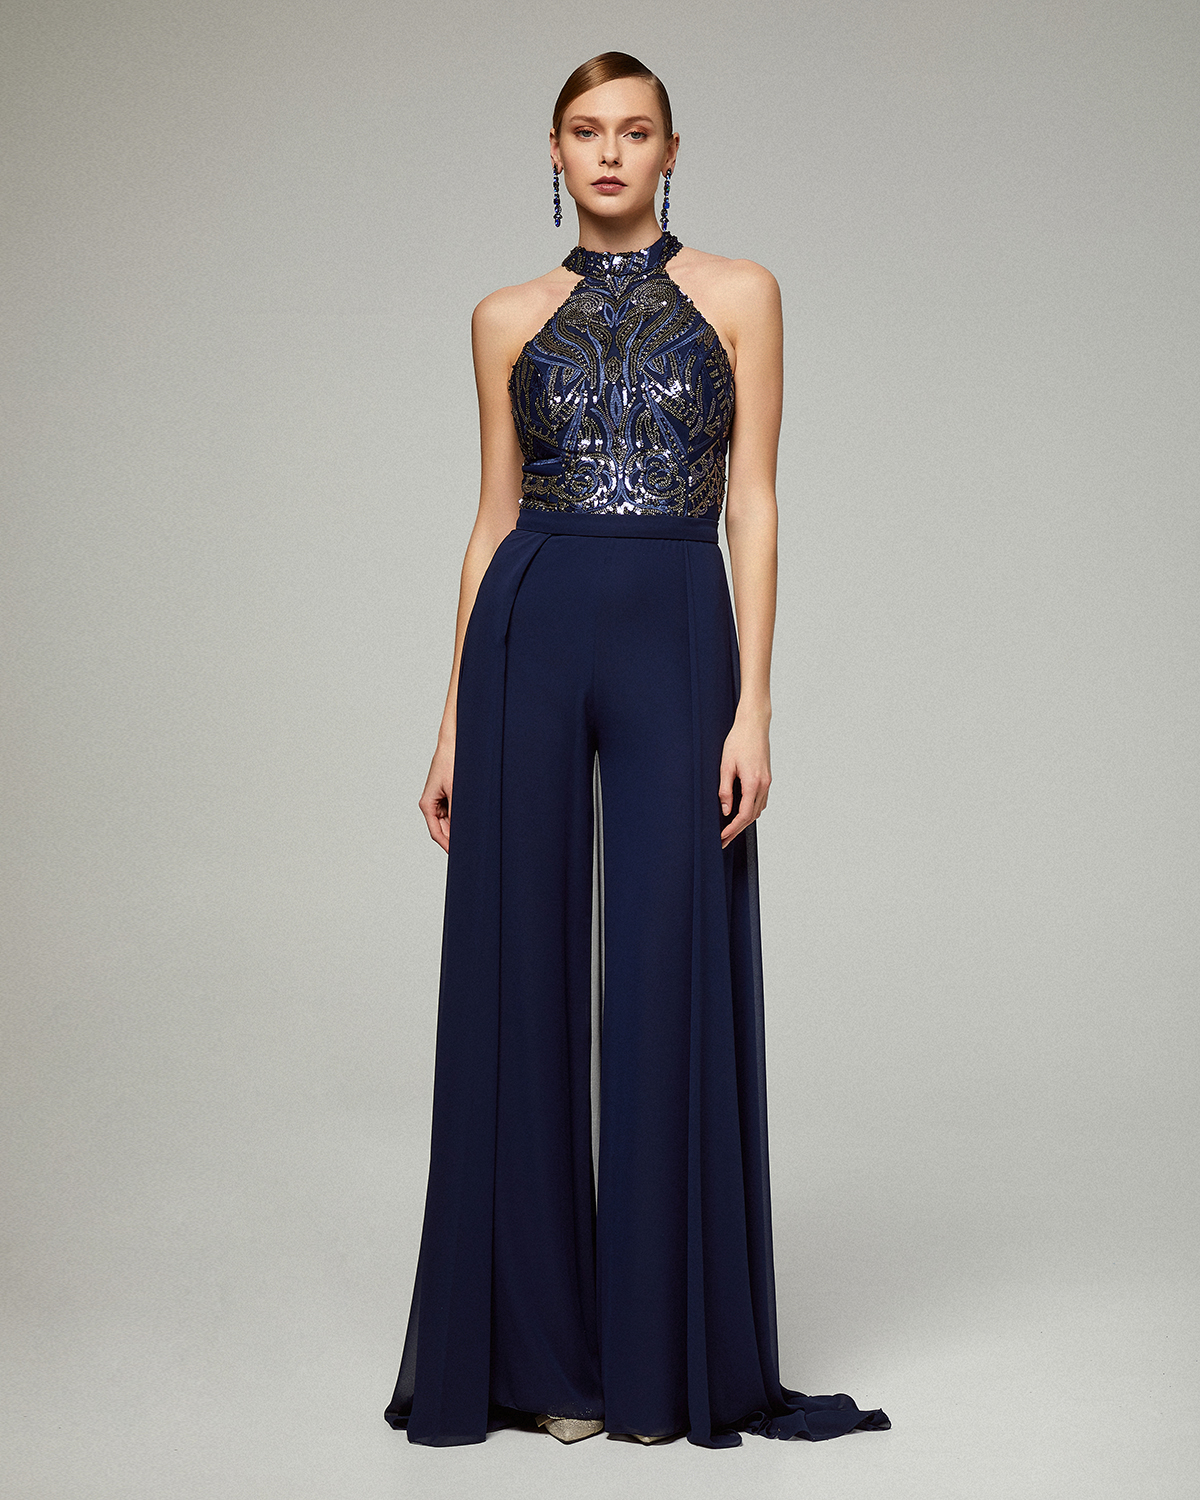 Evening jumpsuit with beaded top and chiffon skirt